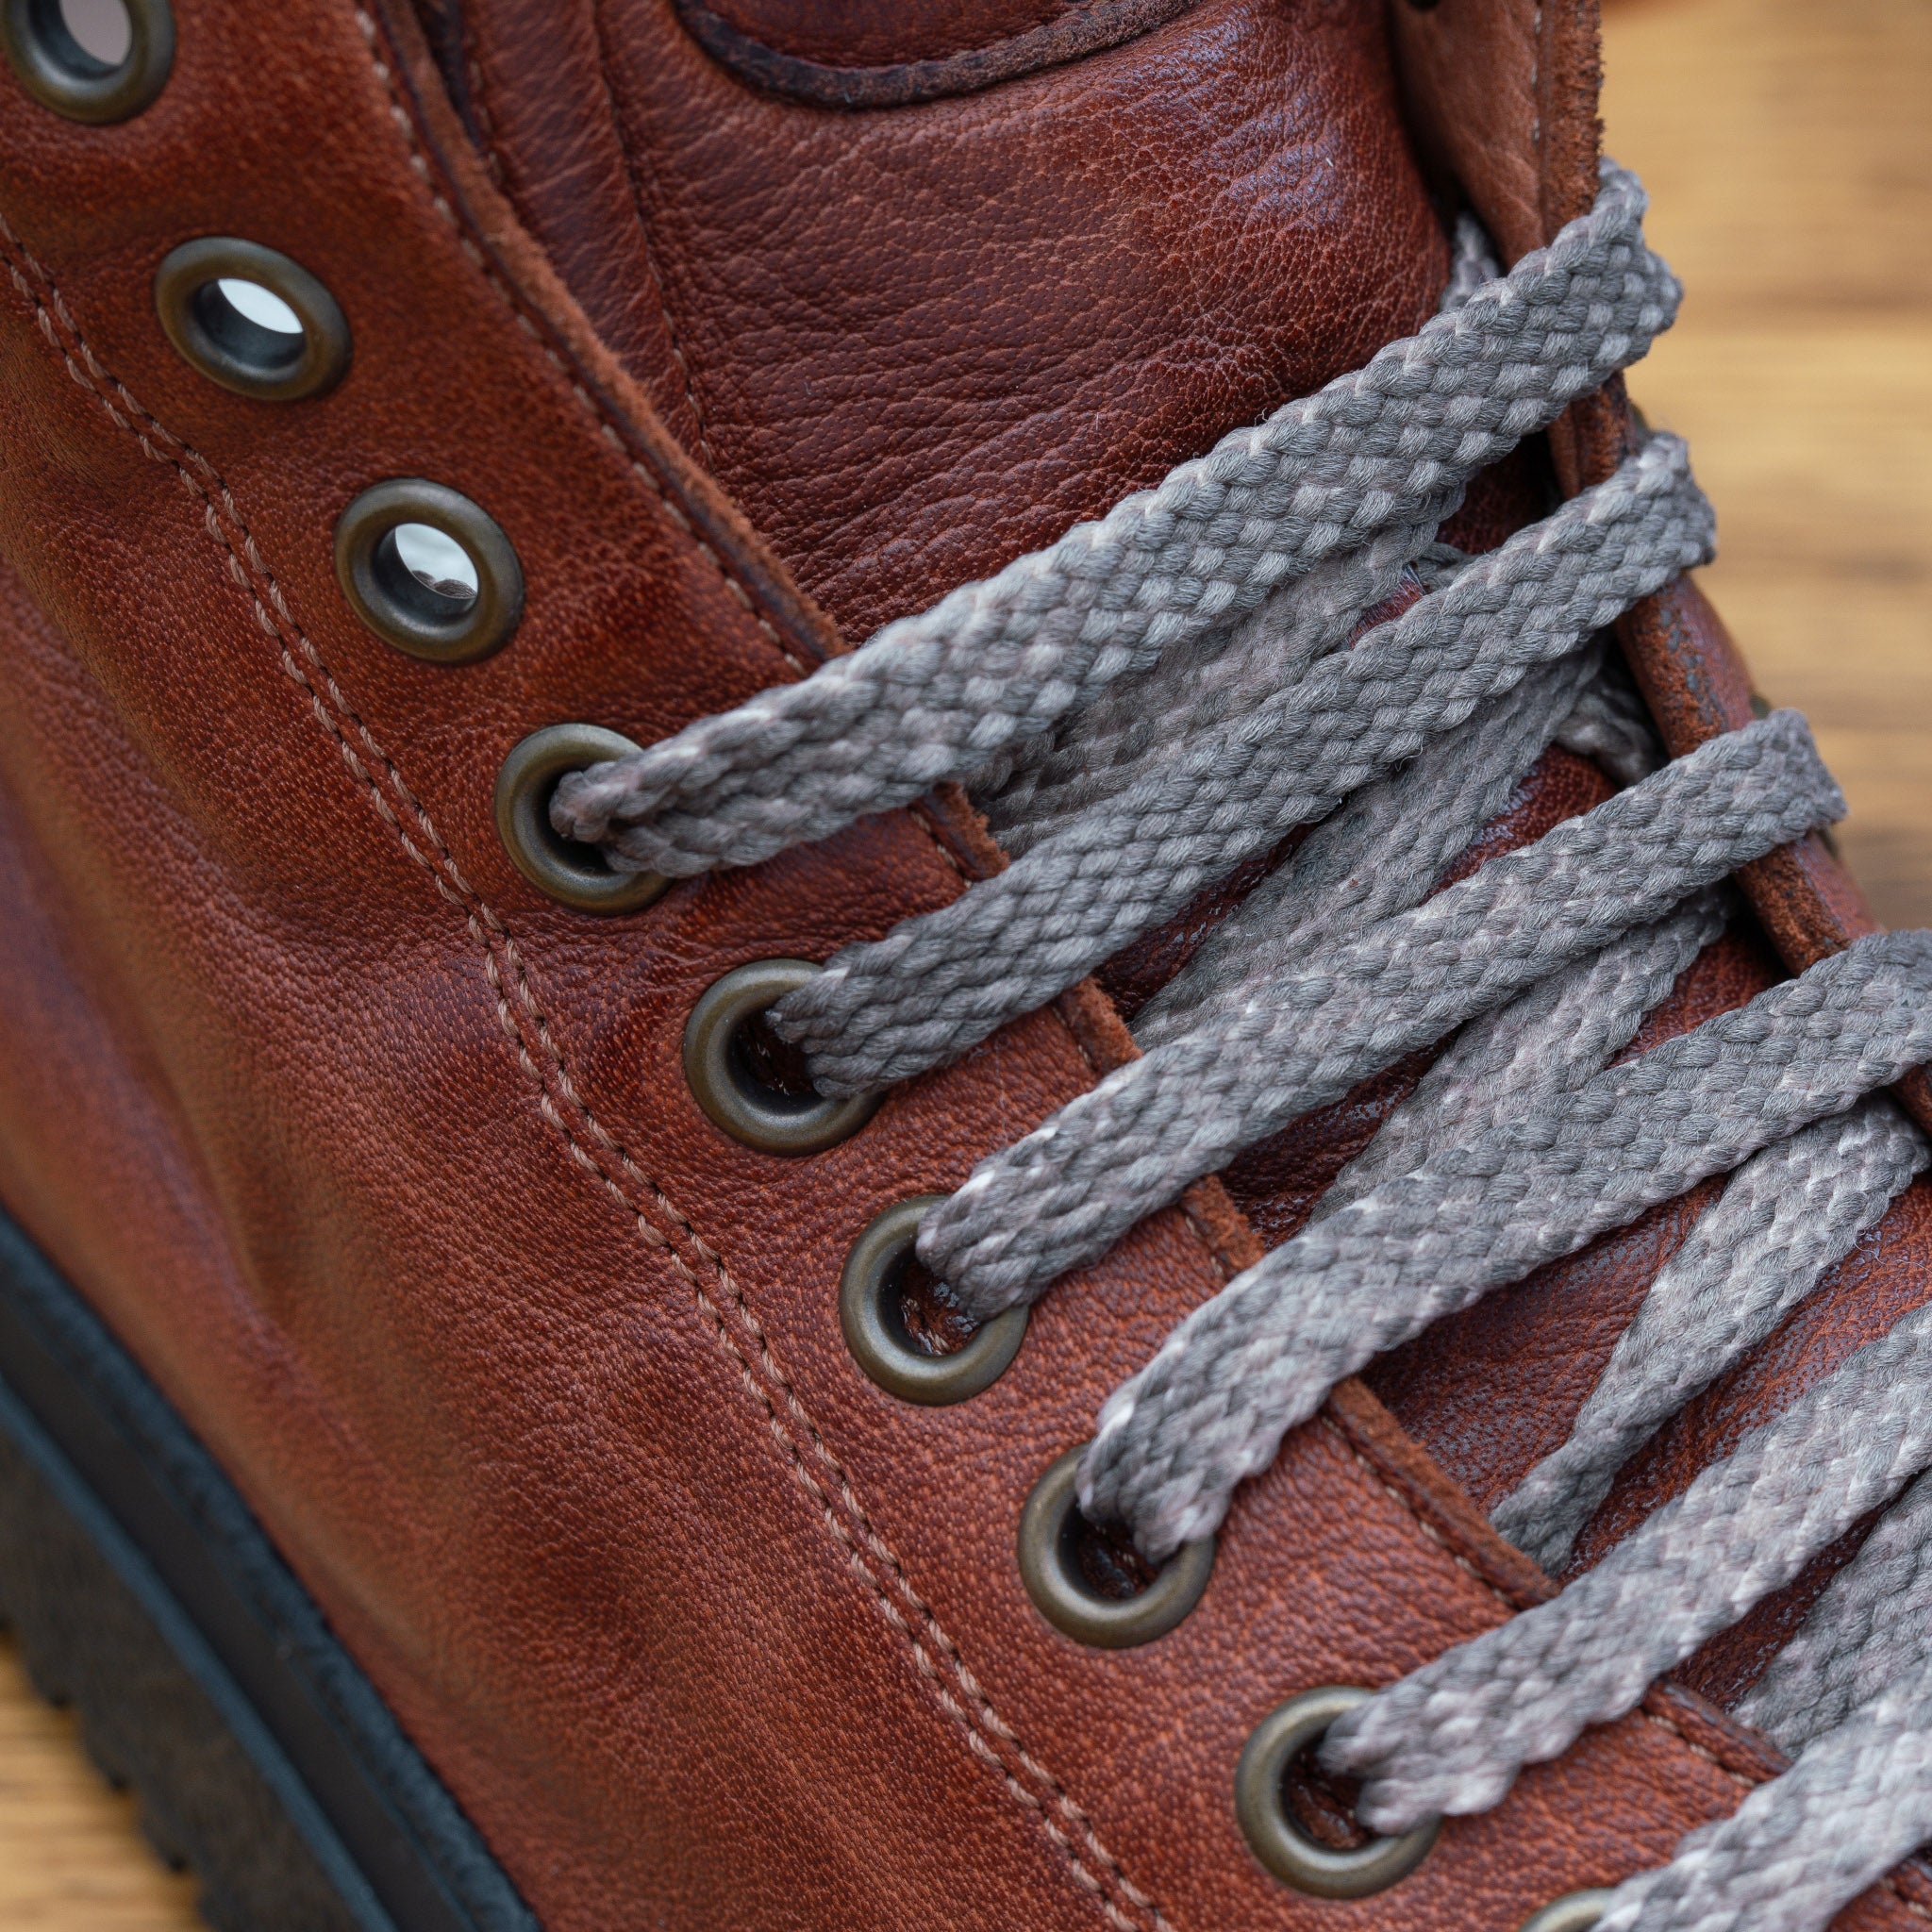 Up close picture of the vamp showing the 10 eyelet of H883 Calzoleria Toscana Coker High Top Benso Sneaker